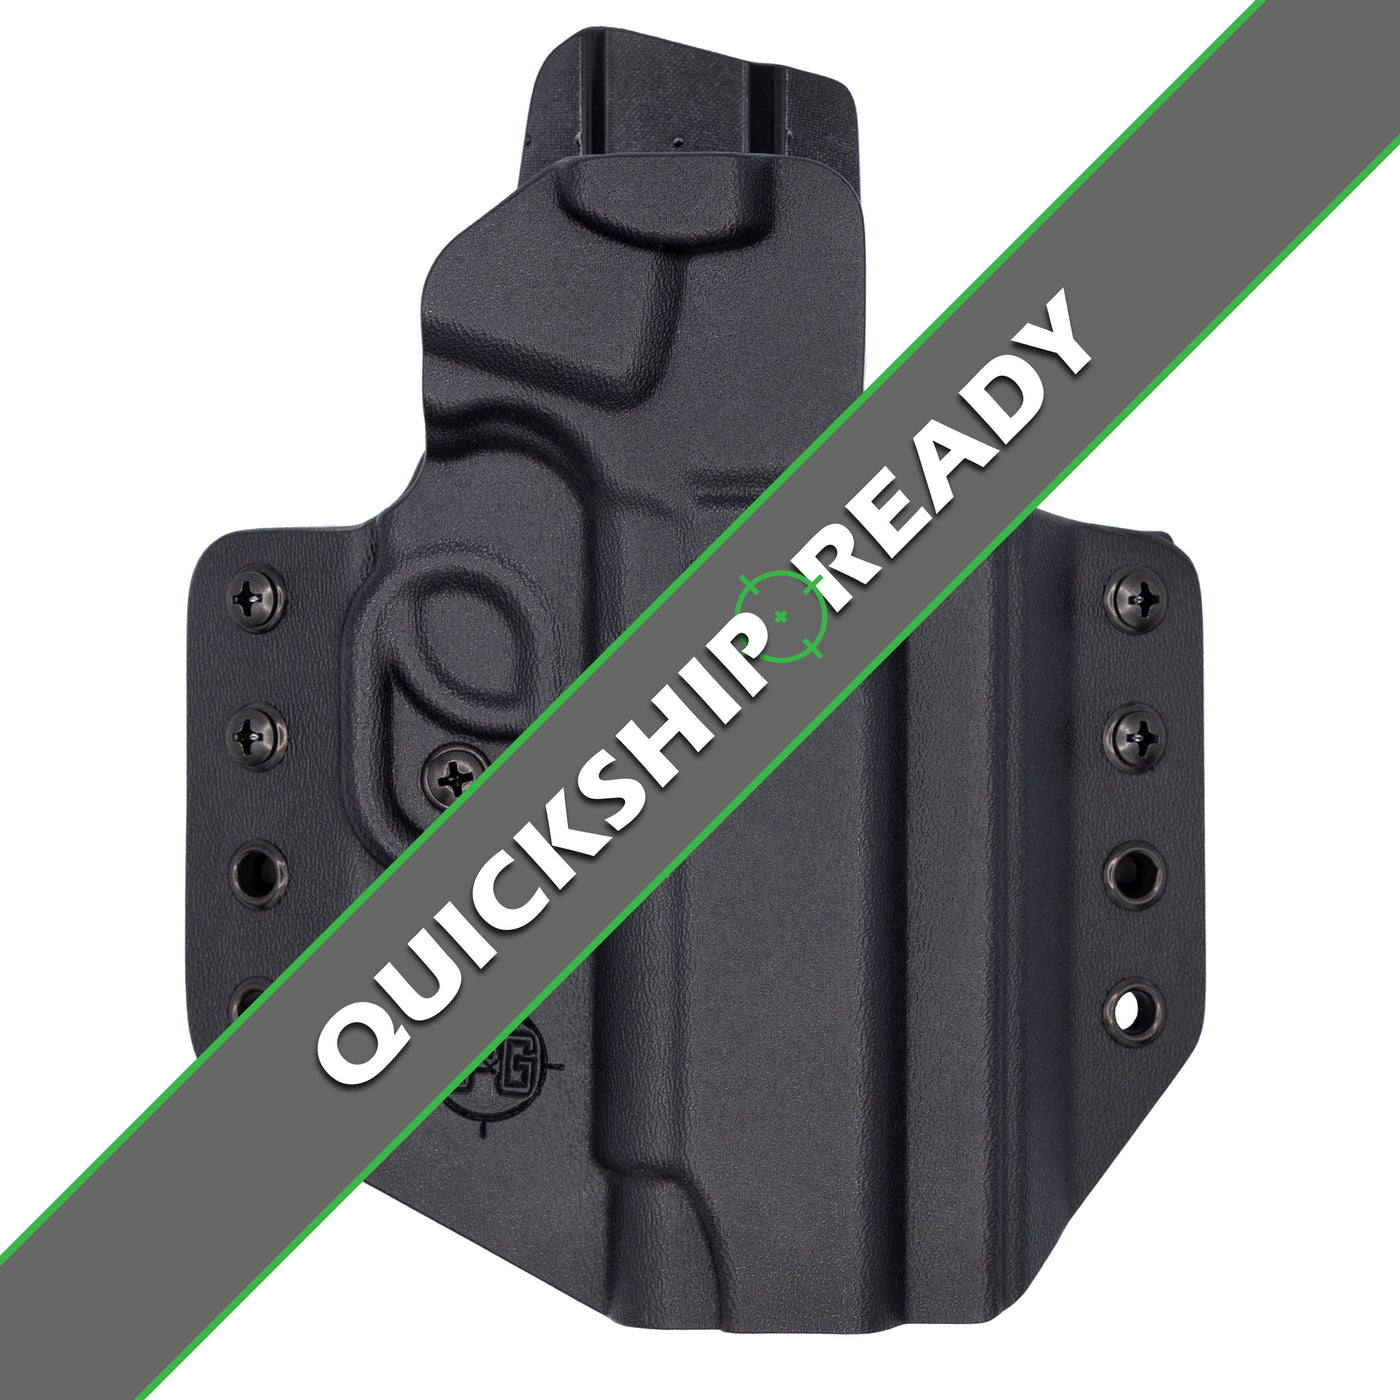 This is the quickship C&G Holsters outside the waistband holster for a 1911 Colt Commander model.